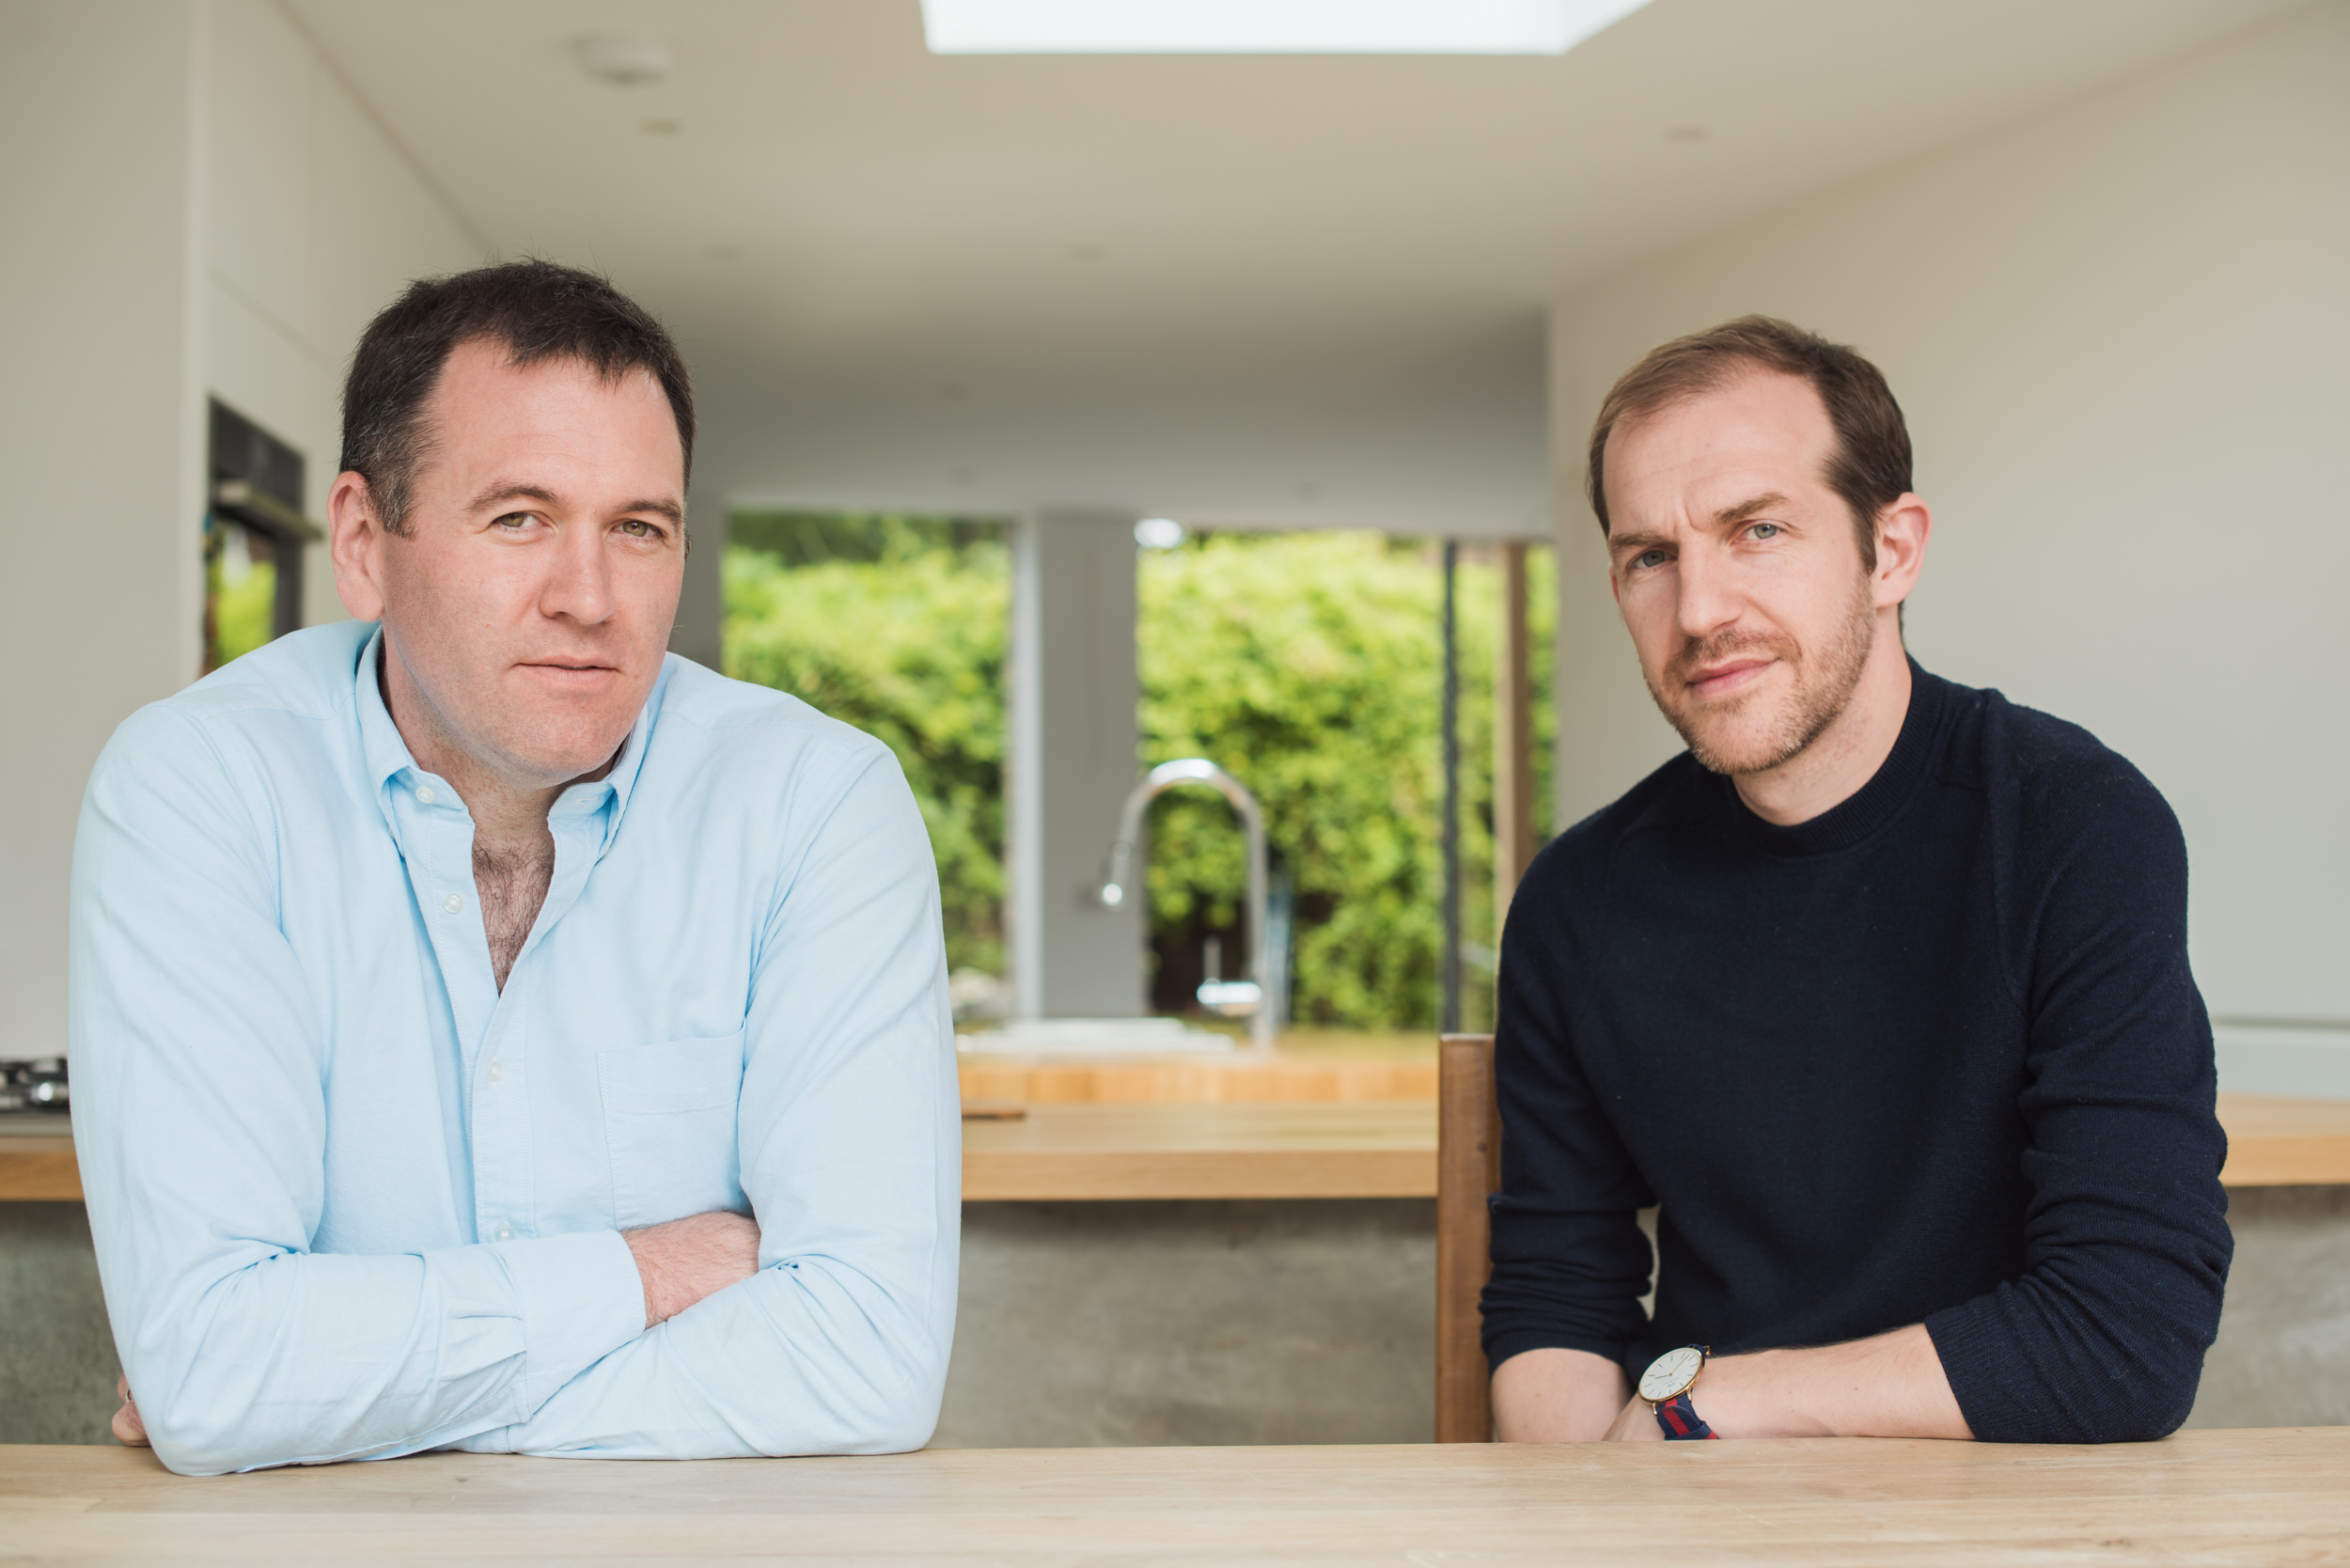 A CANDID CORPORATE PORTRAIT OF CEO JIM COLMAN AND ROB FROM UNION ARCHITECTS IN LONDON UK